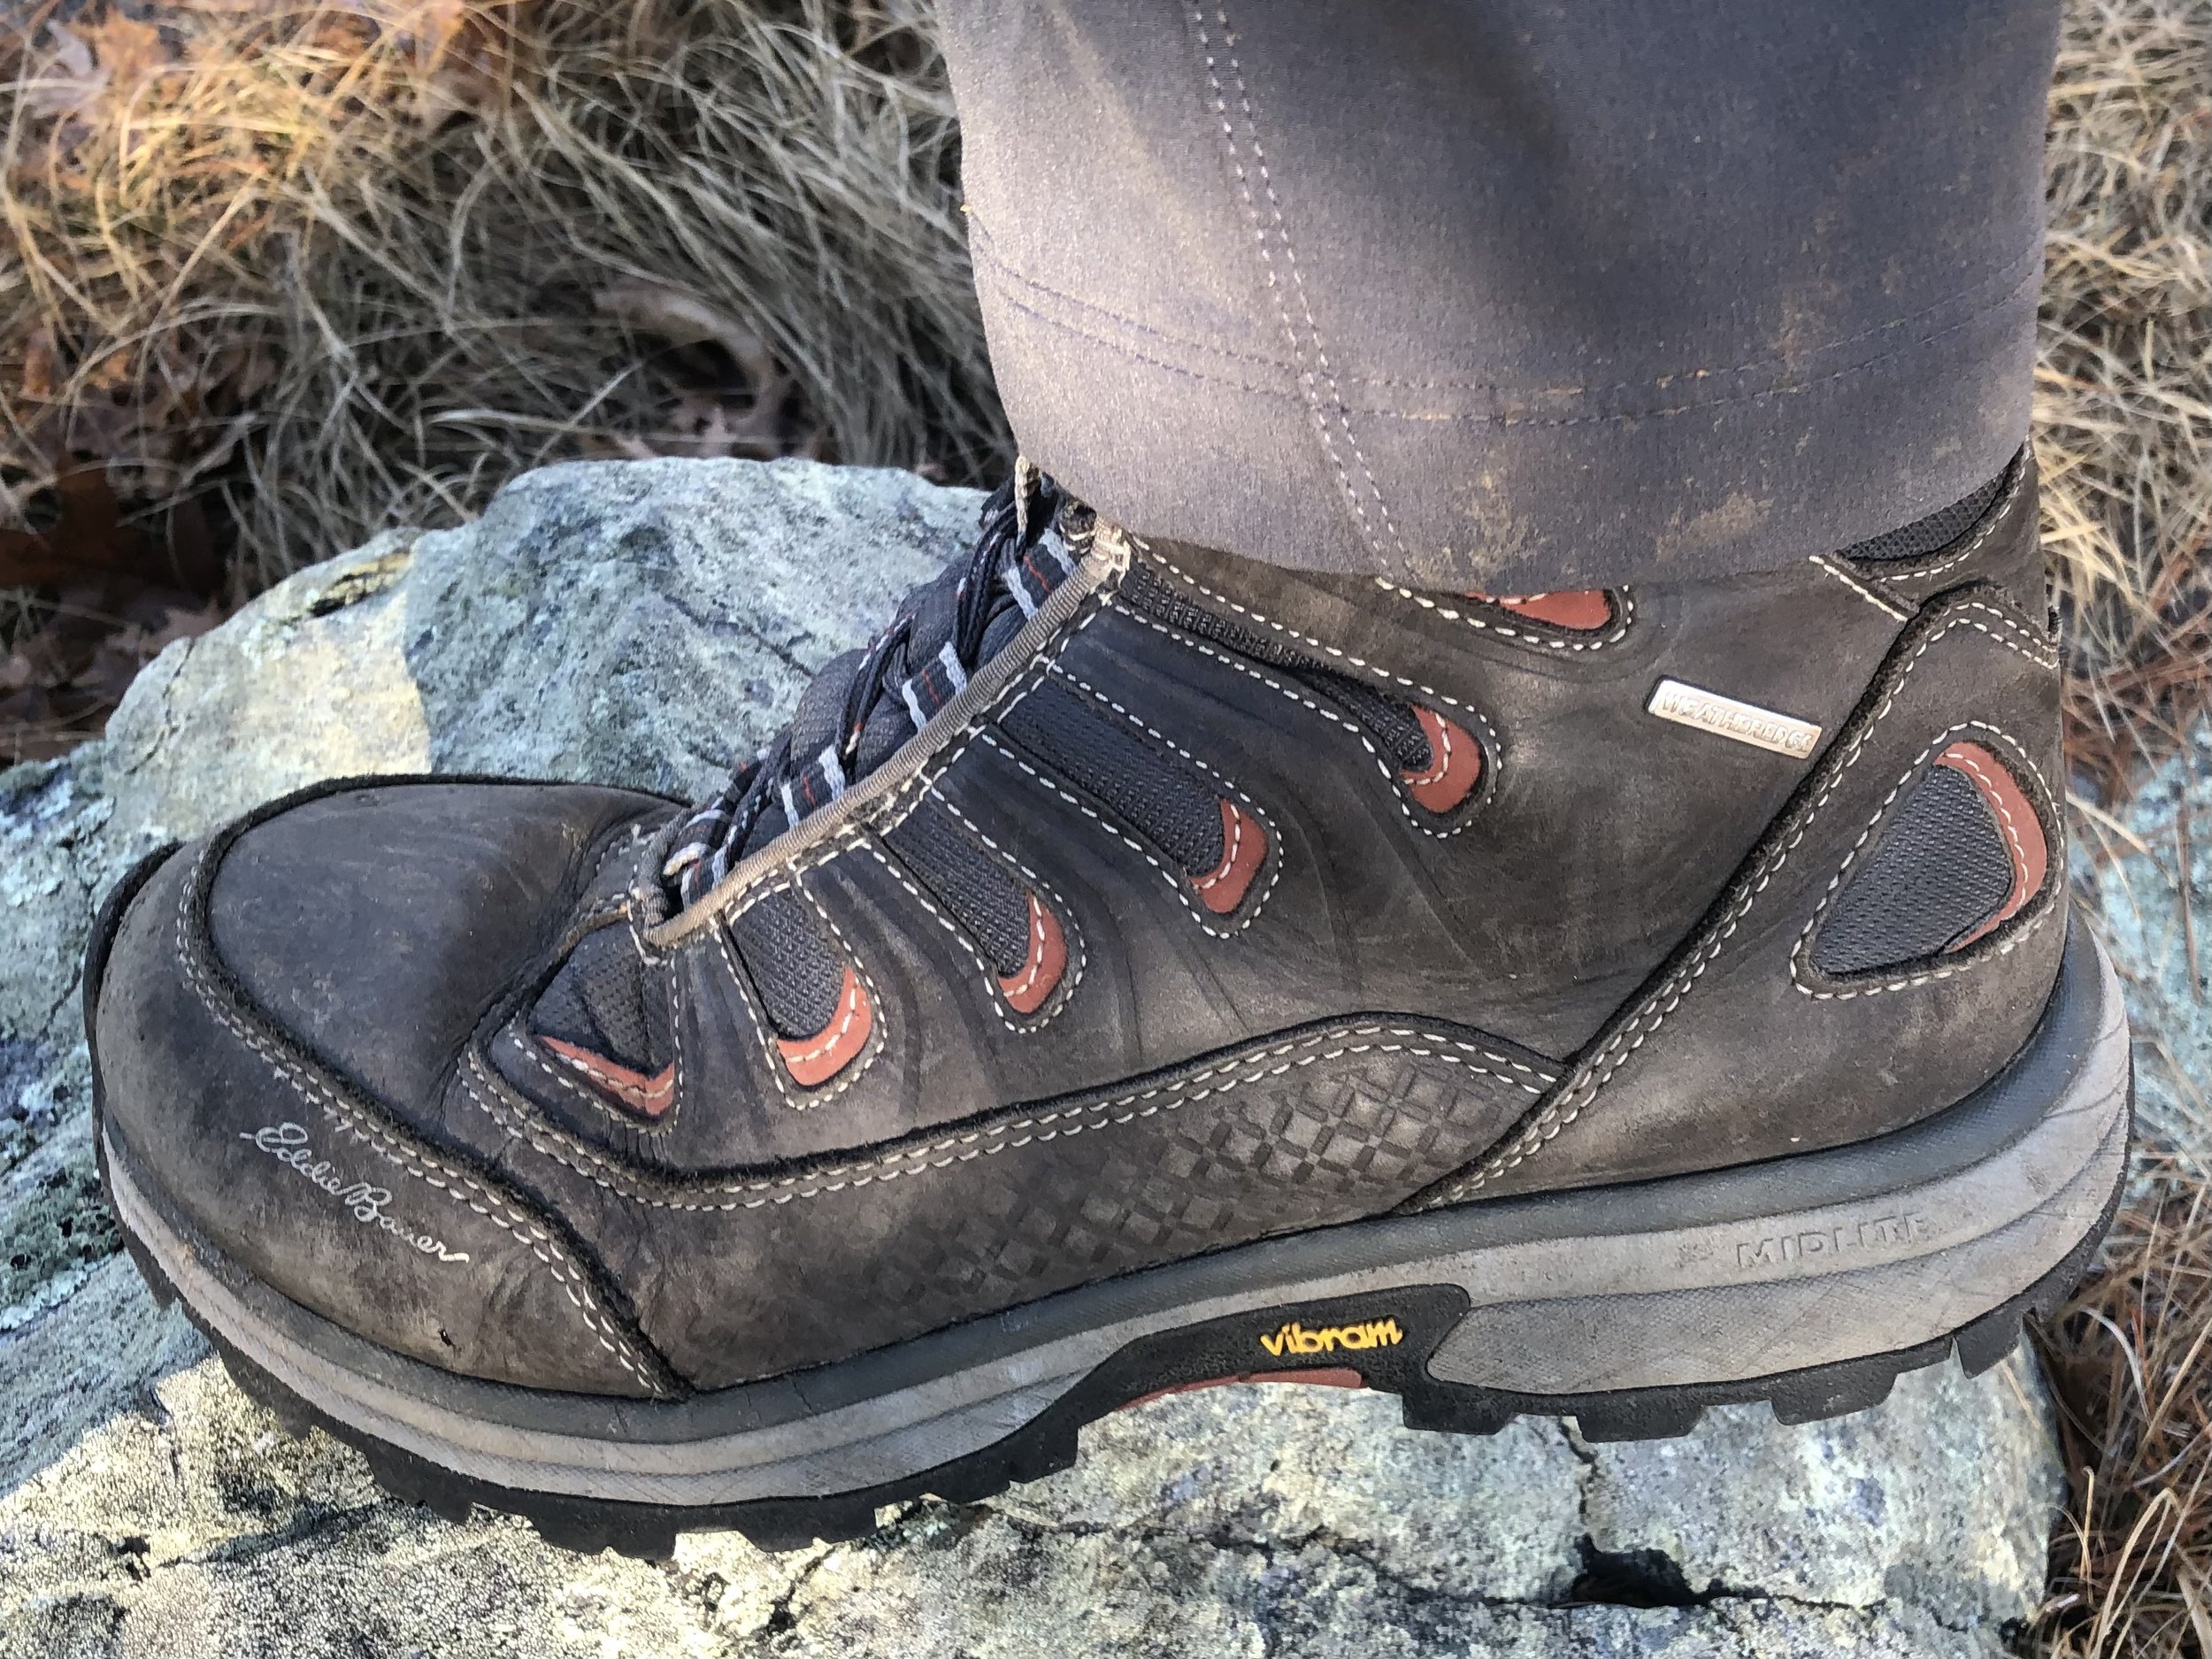 Eddie Bauer Guide Pro Boot Review — The Whites Room